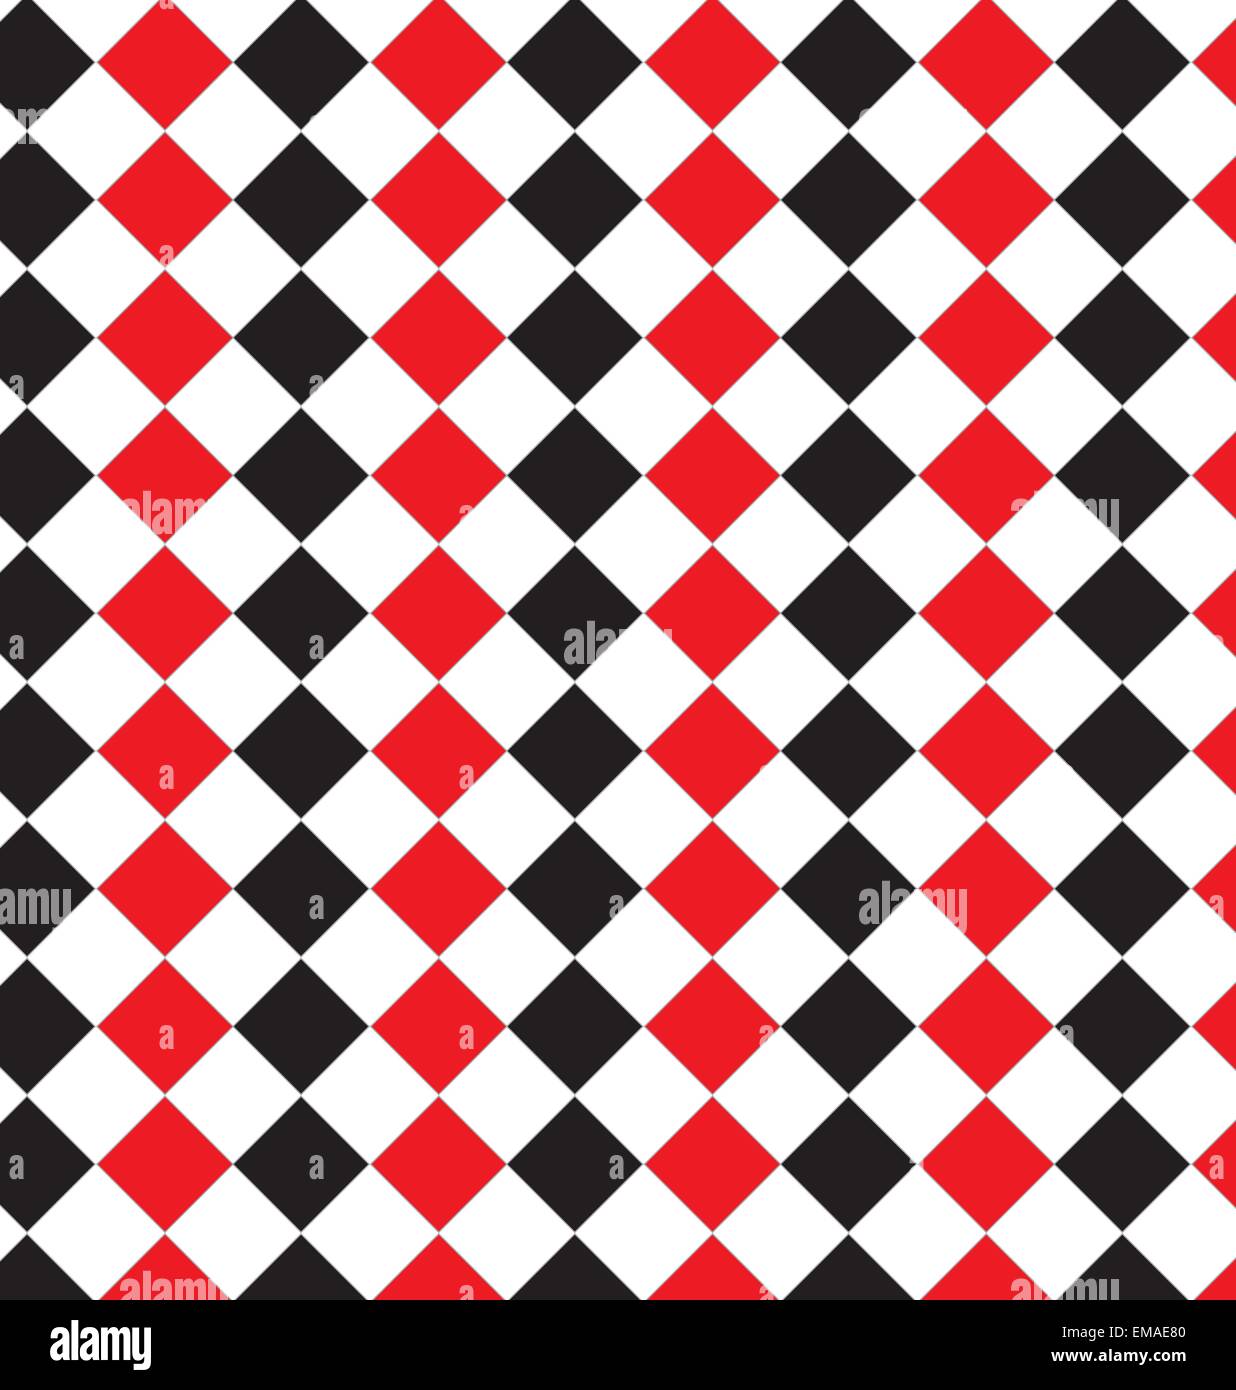 A Seamless vector pattern of black white and red diamond shapes Stock Vector